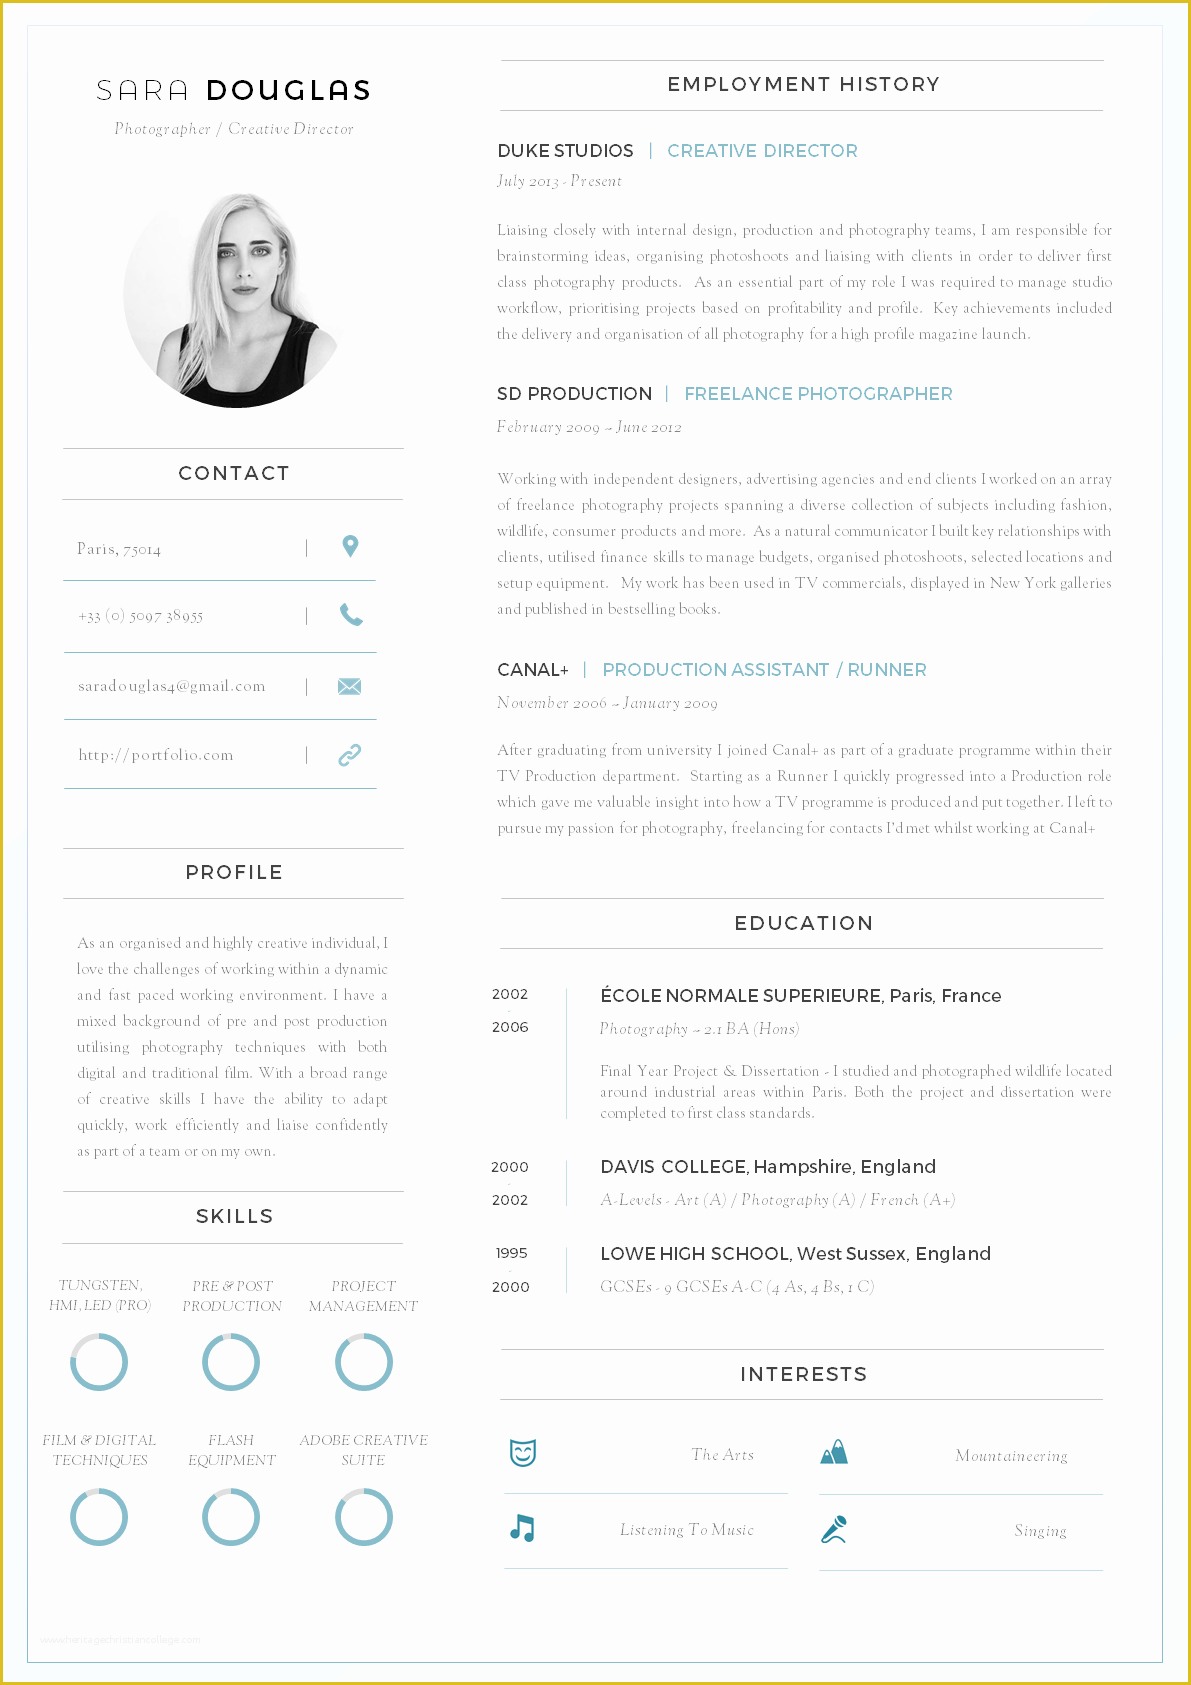 View Free Resume Templates Of 43 Modern Resume Templates